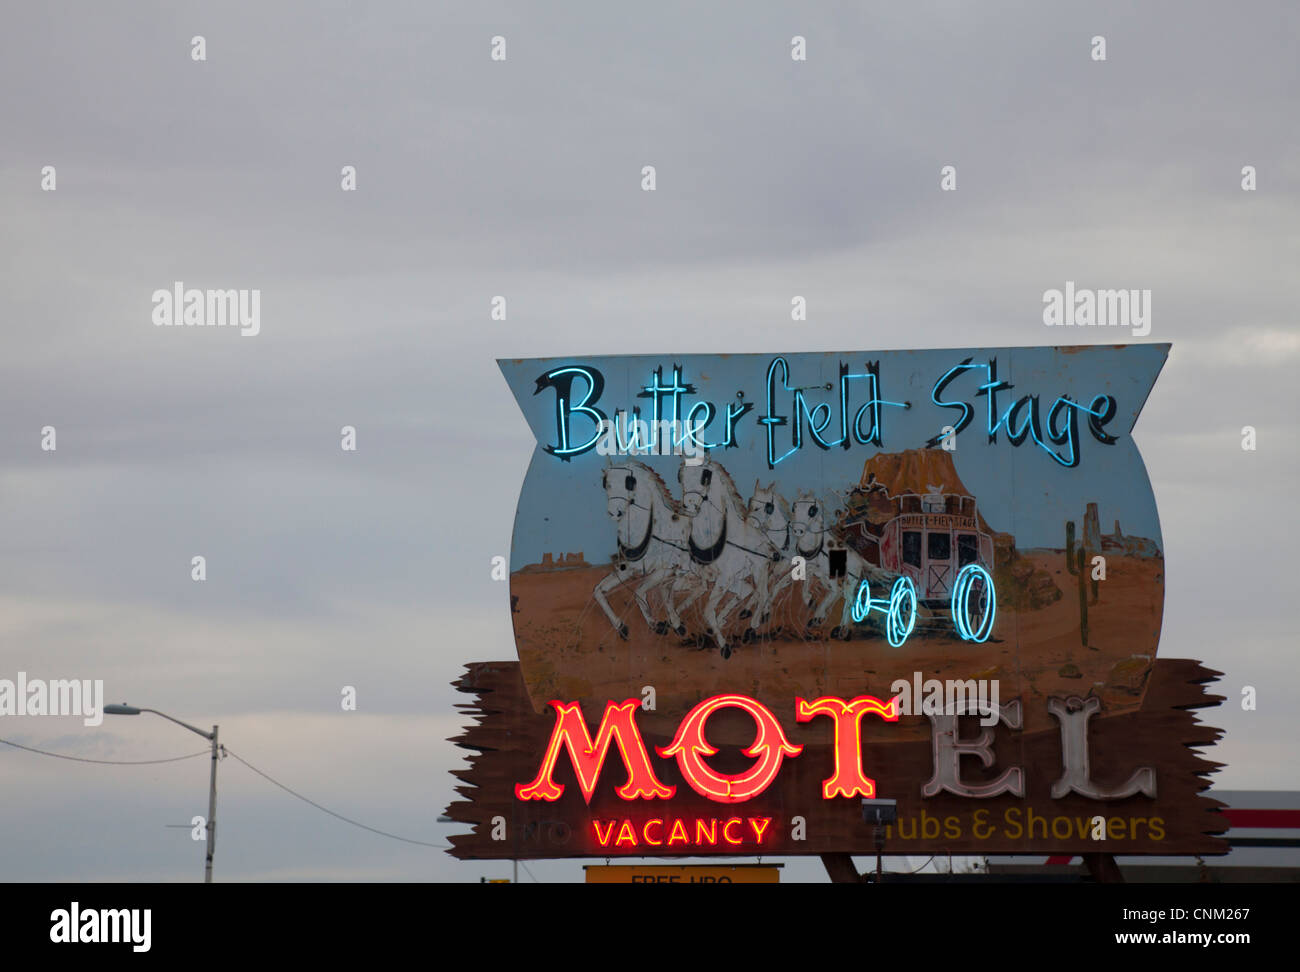 Butterfield Stage Motel sign, Deming, New Mexico. Stock Photo